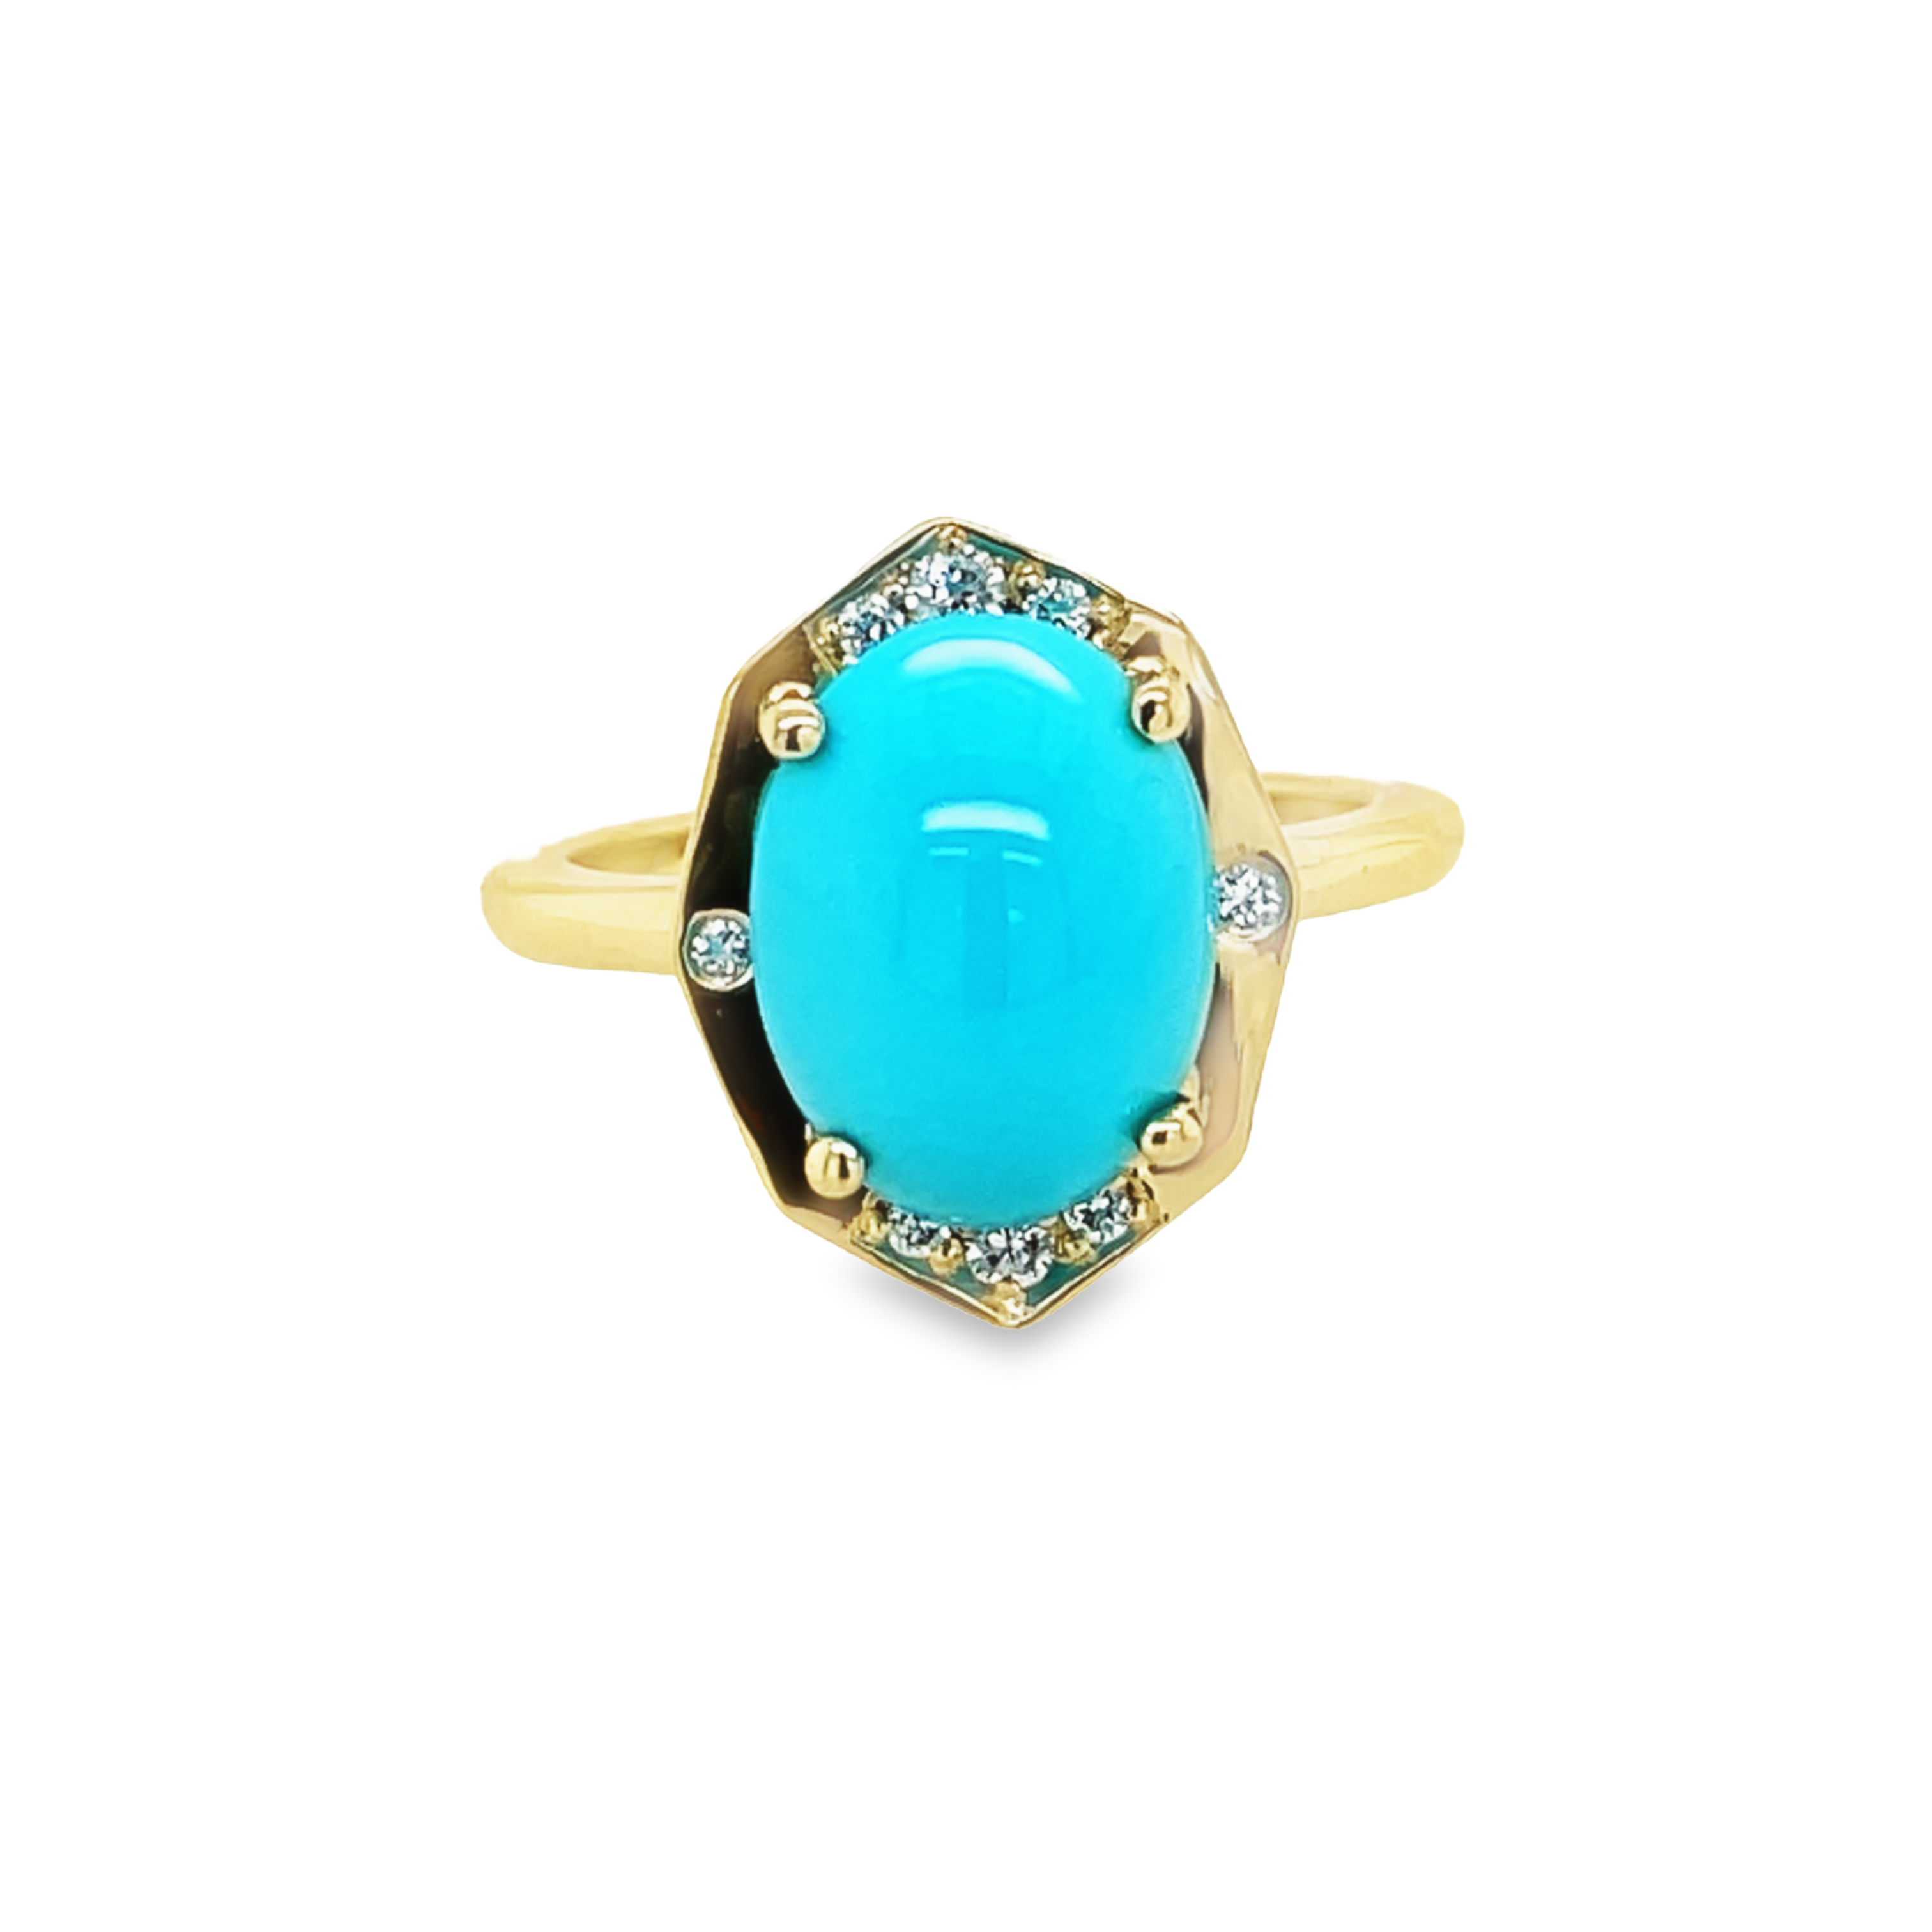 A beautiful statement piece, this 14k yellow gold ring features a stunning turquoise cabochon center, surrounded by round diamonds. A perfect combination of classic styling and modern elegance.